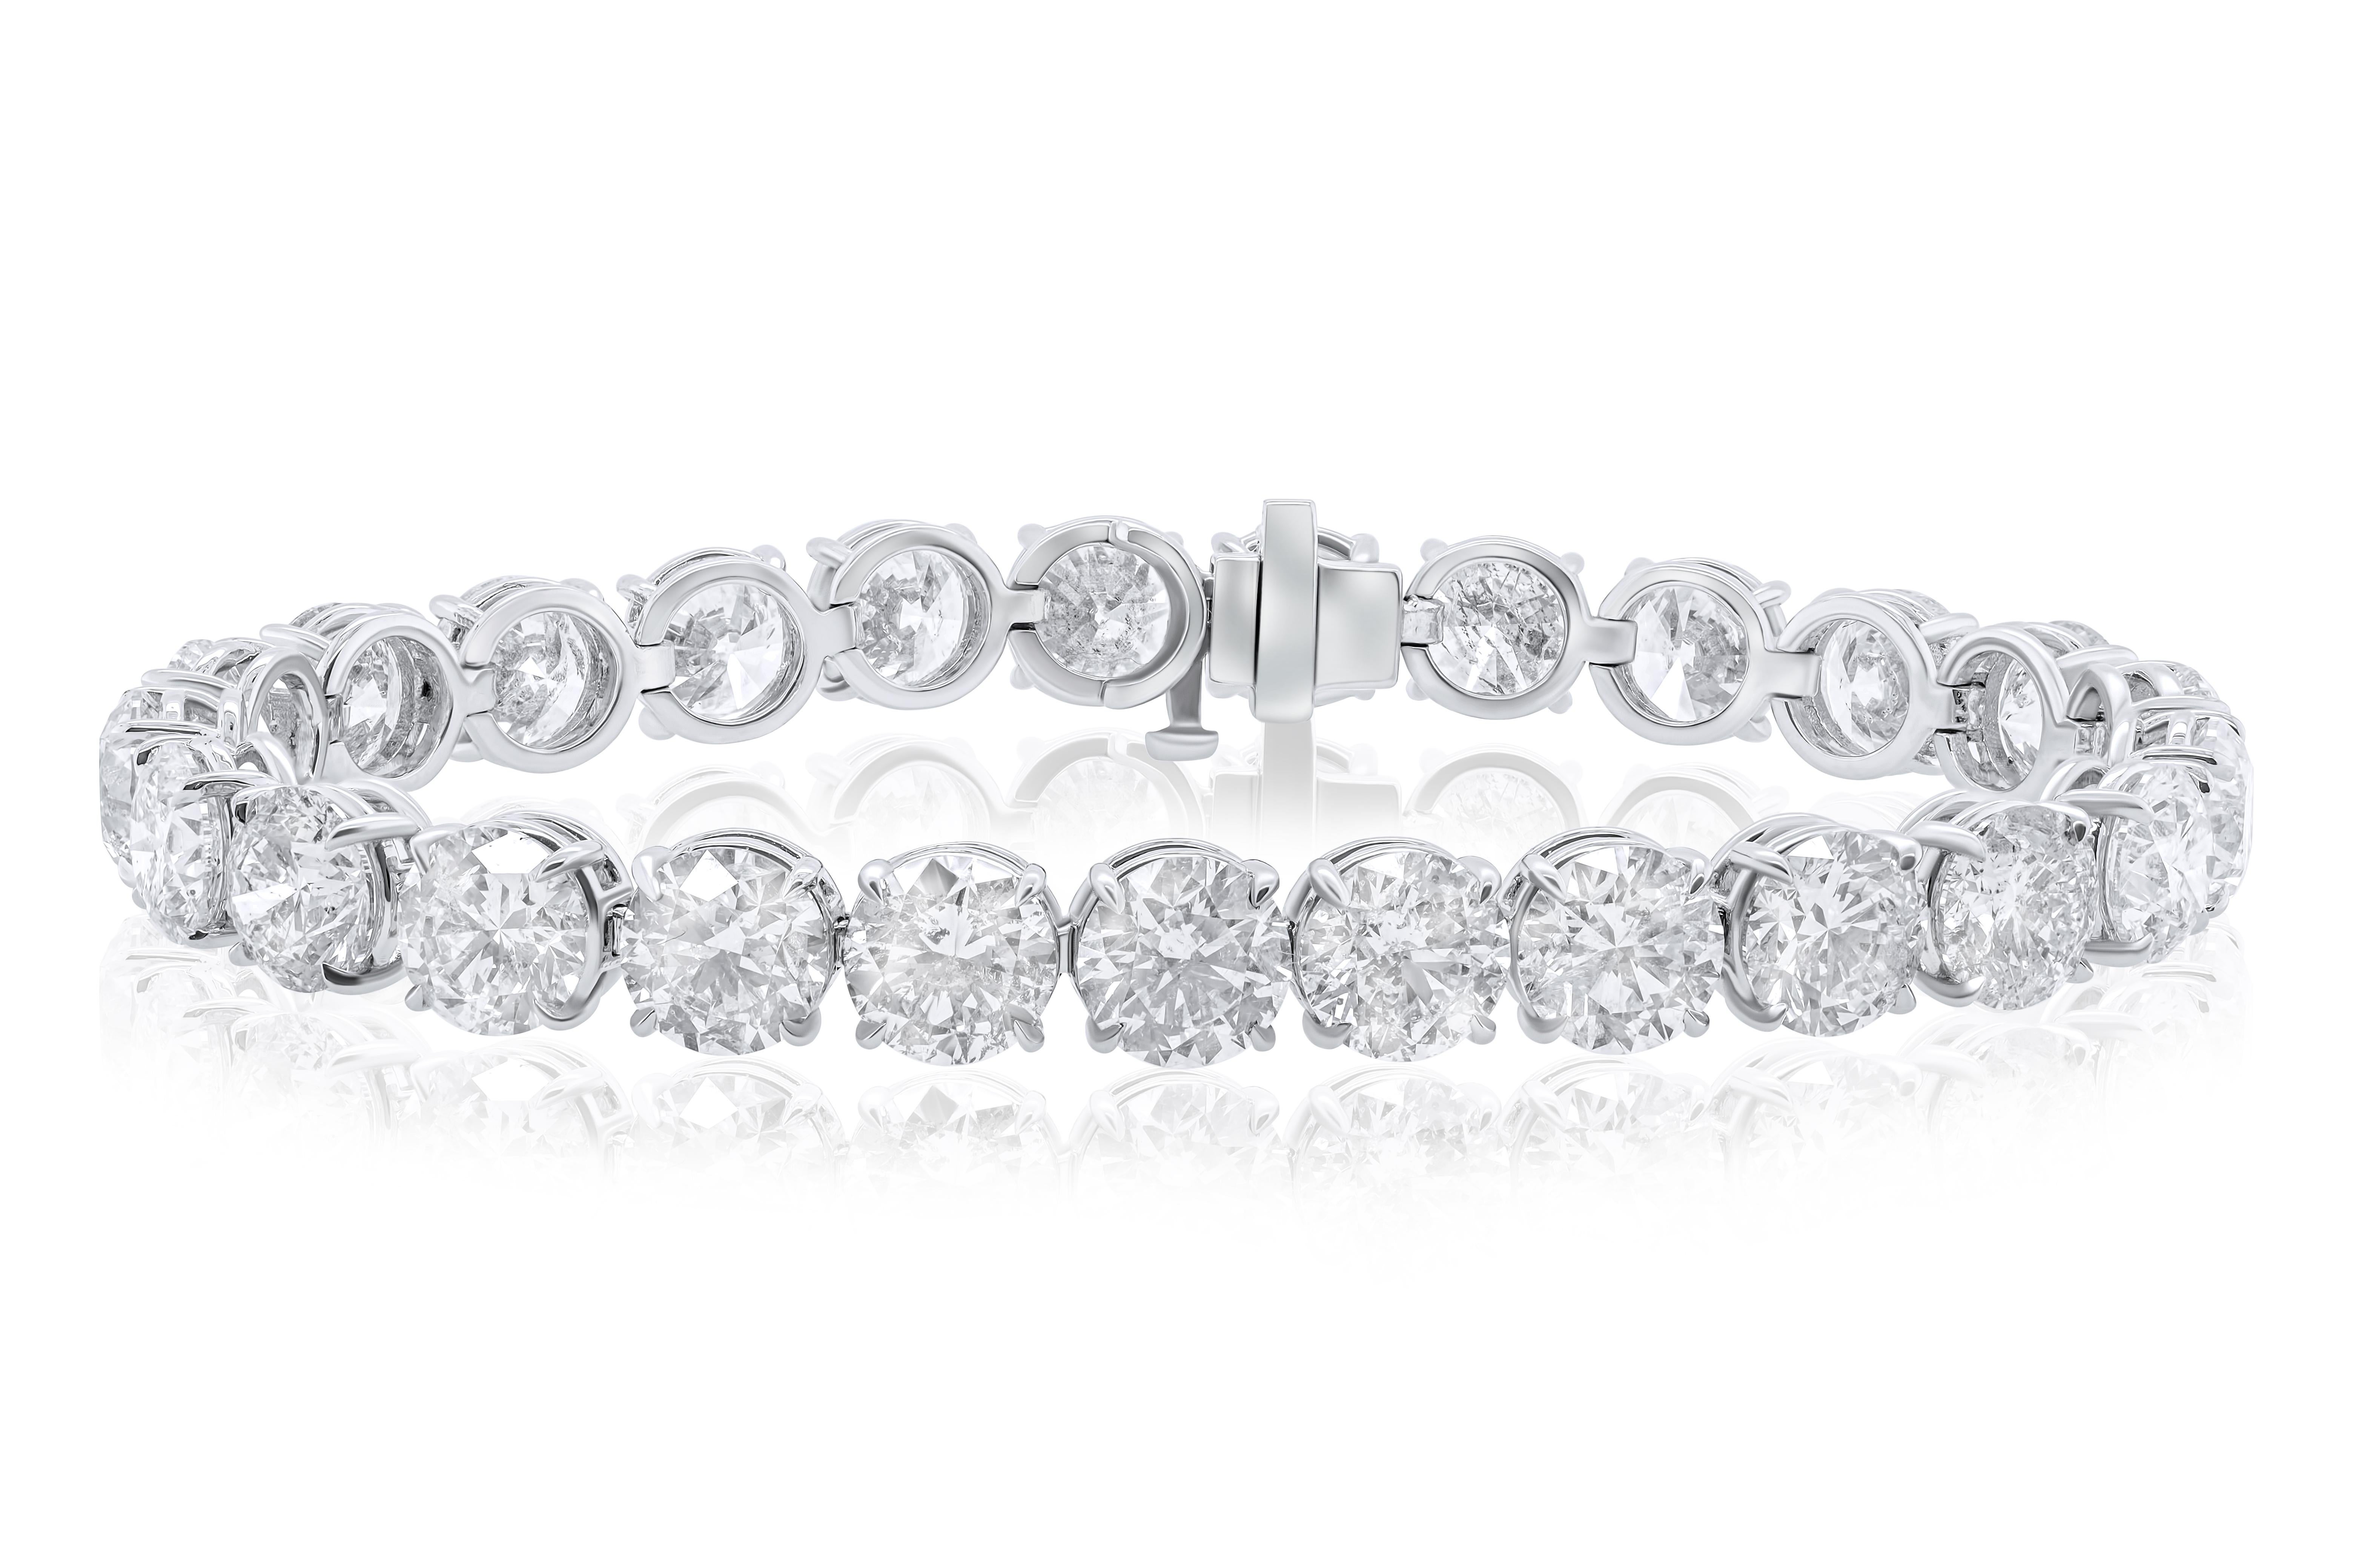 An exceptional quality Rare, One-of-a-kind diamond tennis bracelet with Collection Goods. 
The total diamond weight is 28.50 Carats of Round Ideal Cut GIA Certified Diamonds, 28 GIA Stones in Total, each stone is D-E color IF-VVS2 in clarity